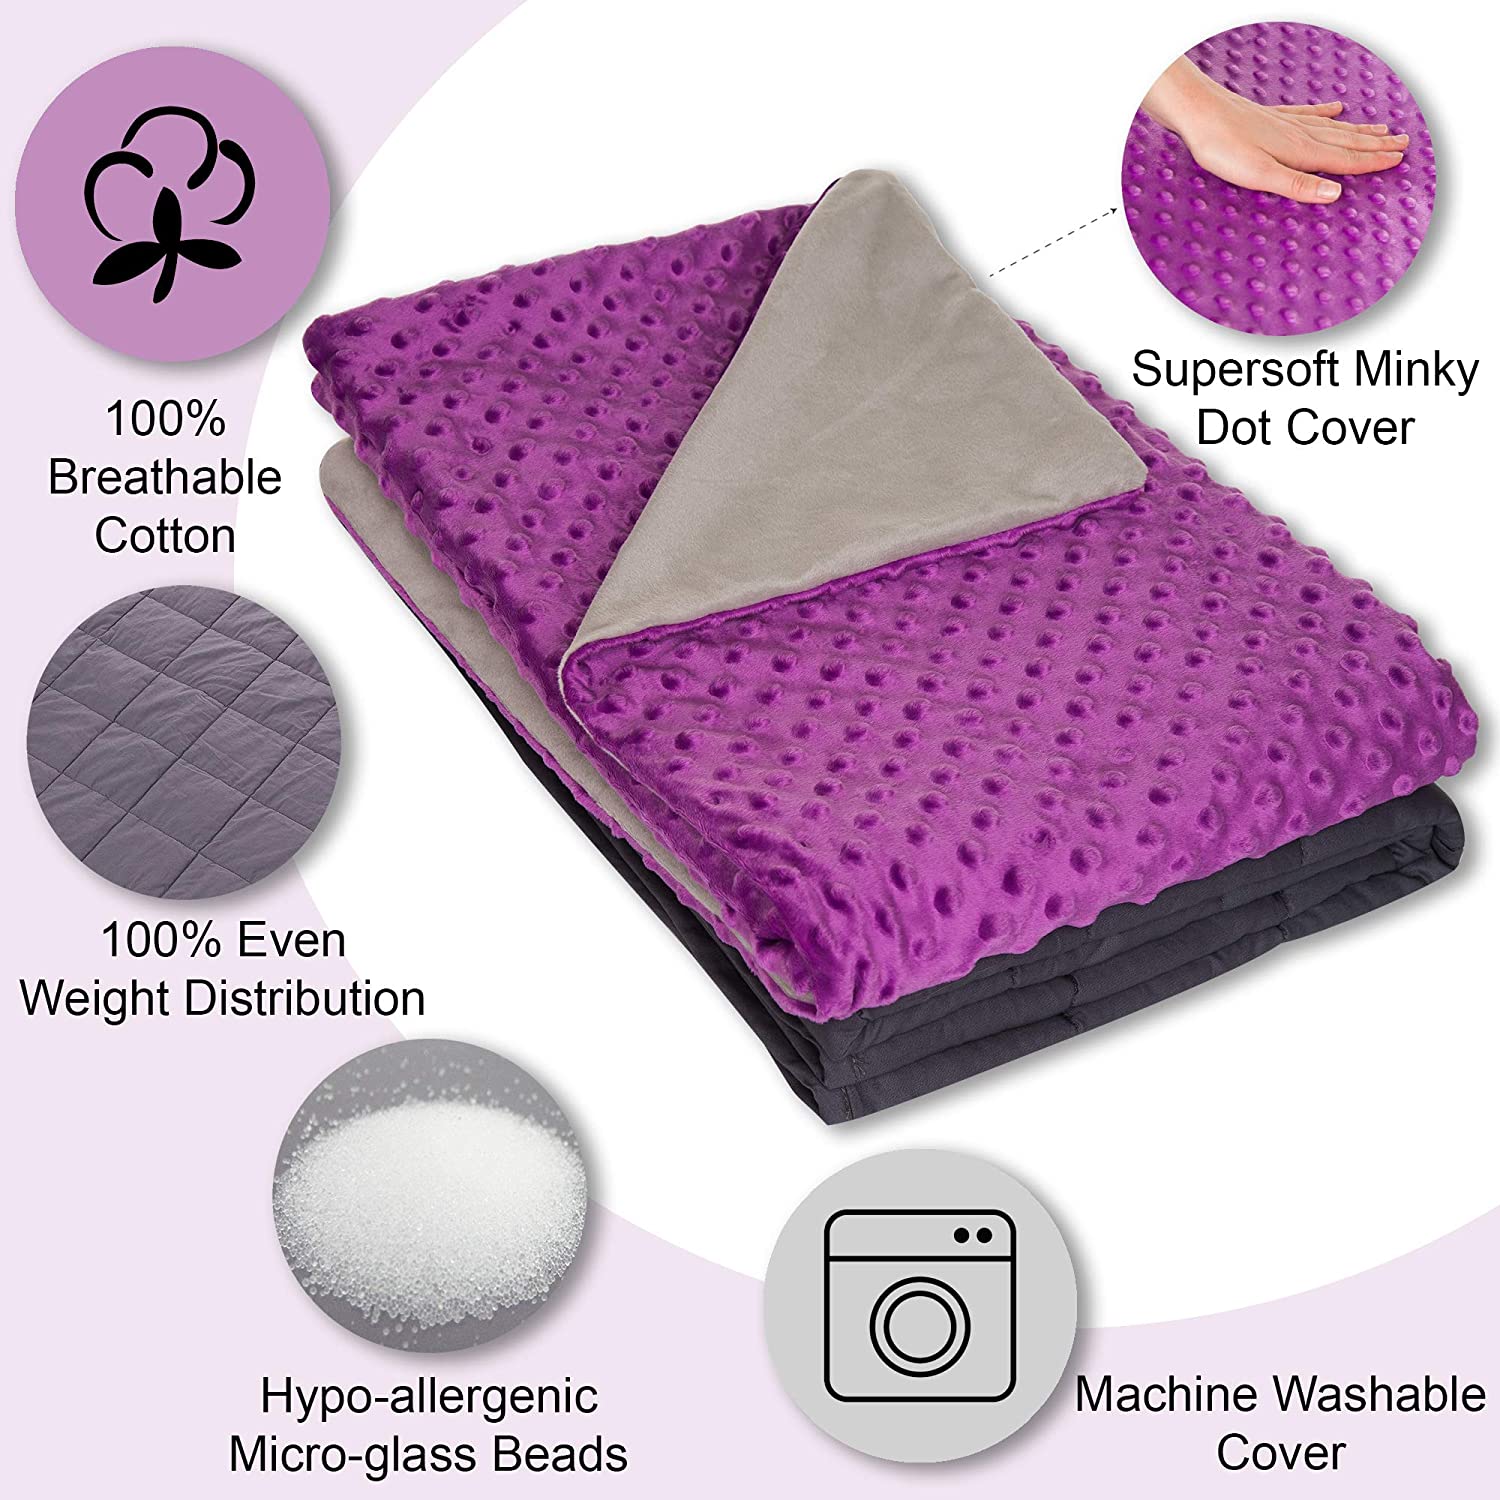 Super Soft 7 Lbs Weighted Blanket for Kids with Removable Cover - 41